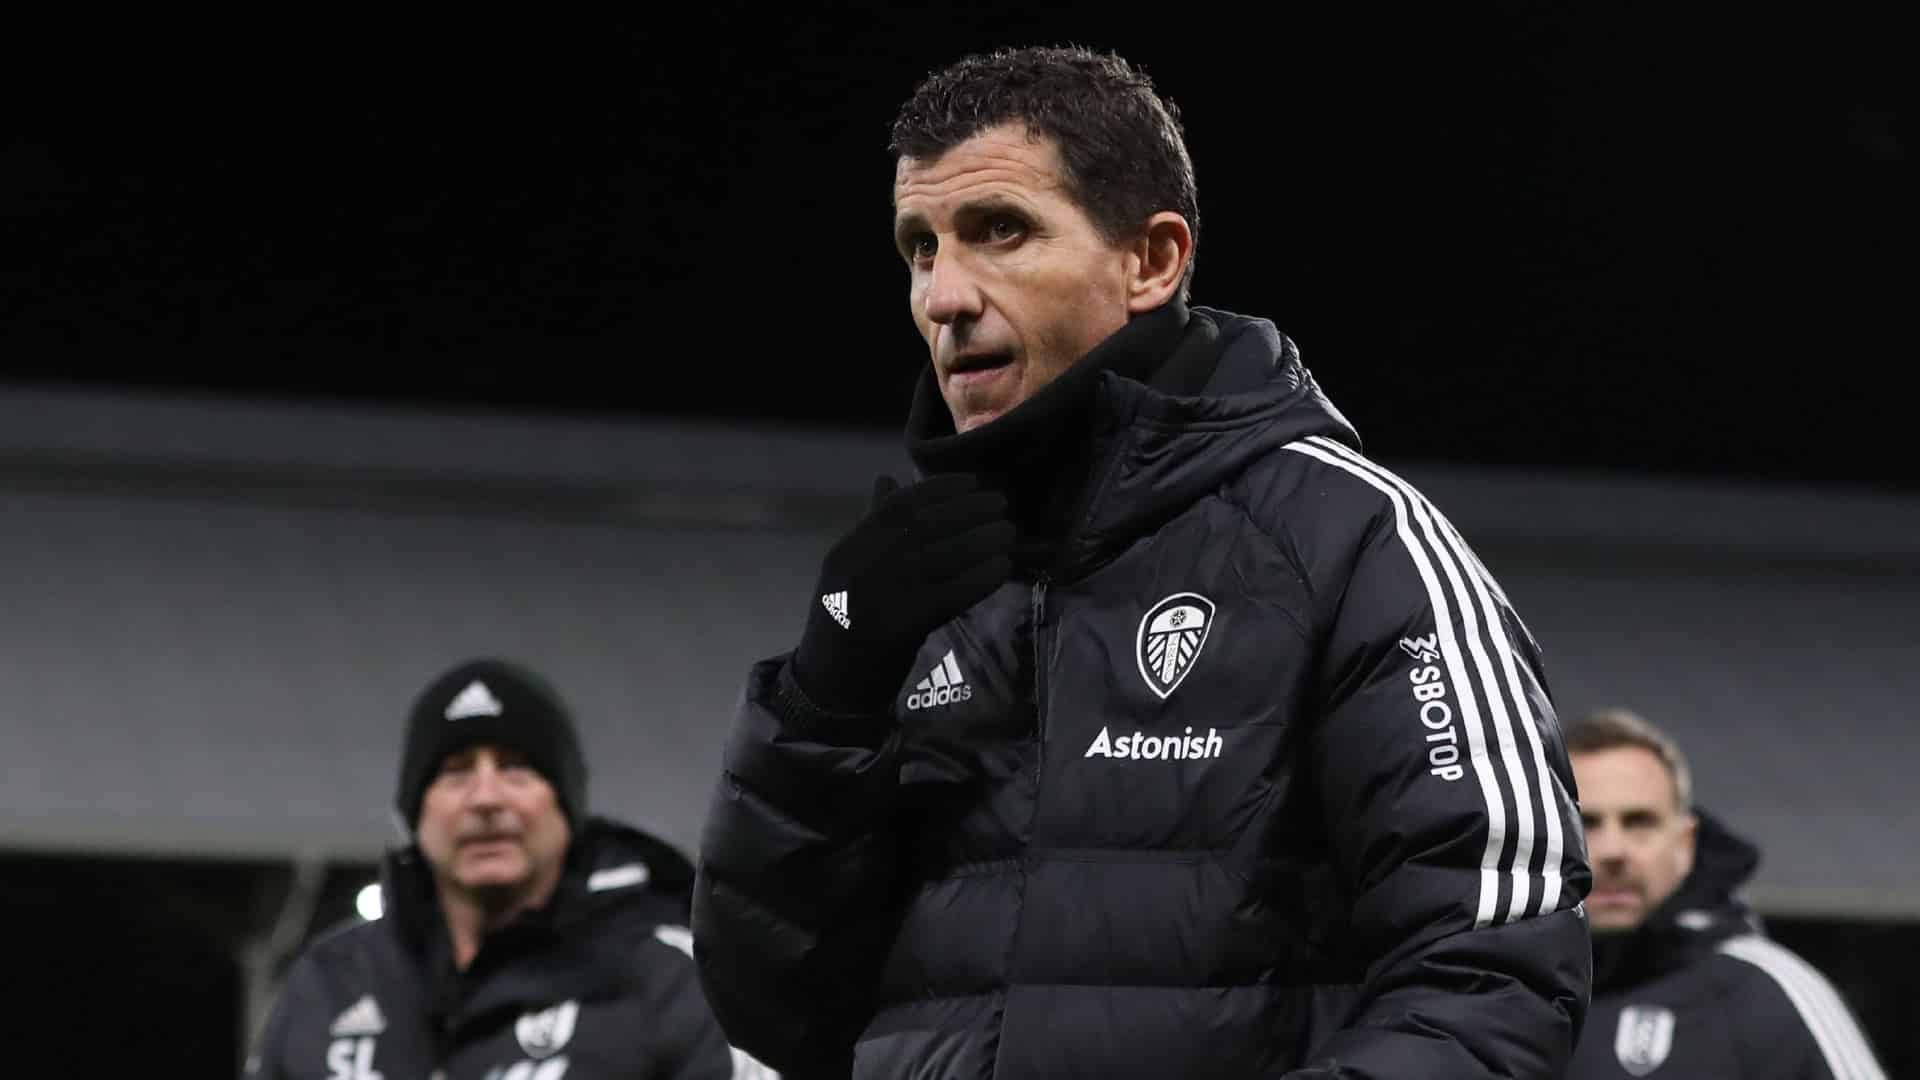 Javi Gracia wrapping up warm in his newest Leeds United training gear, hoping it's not too late